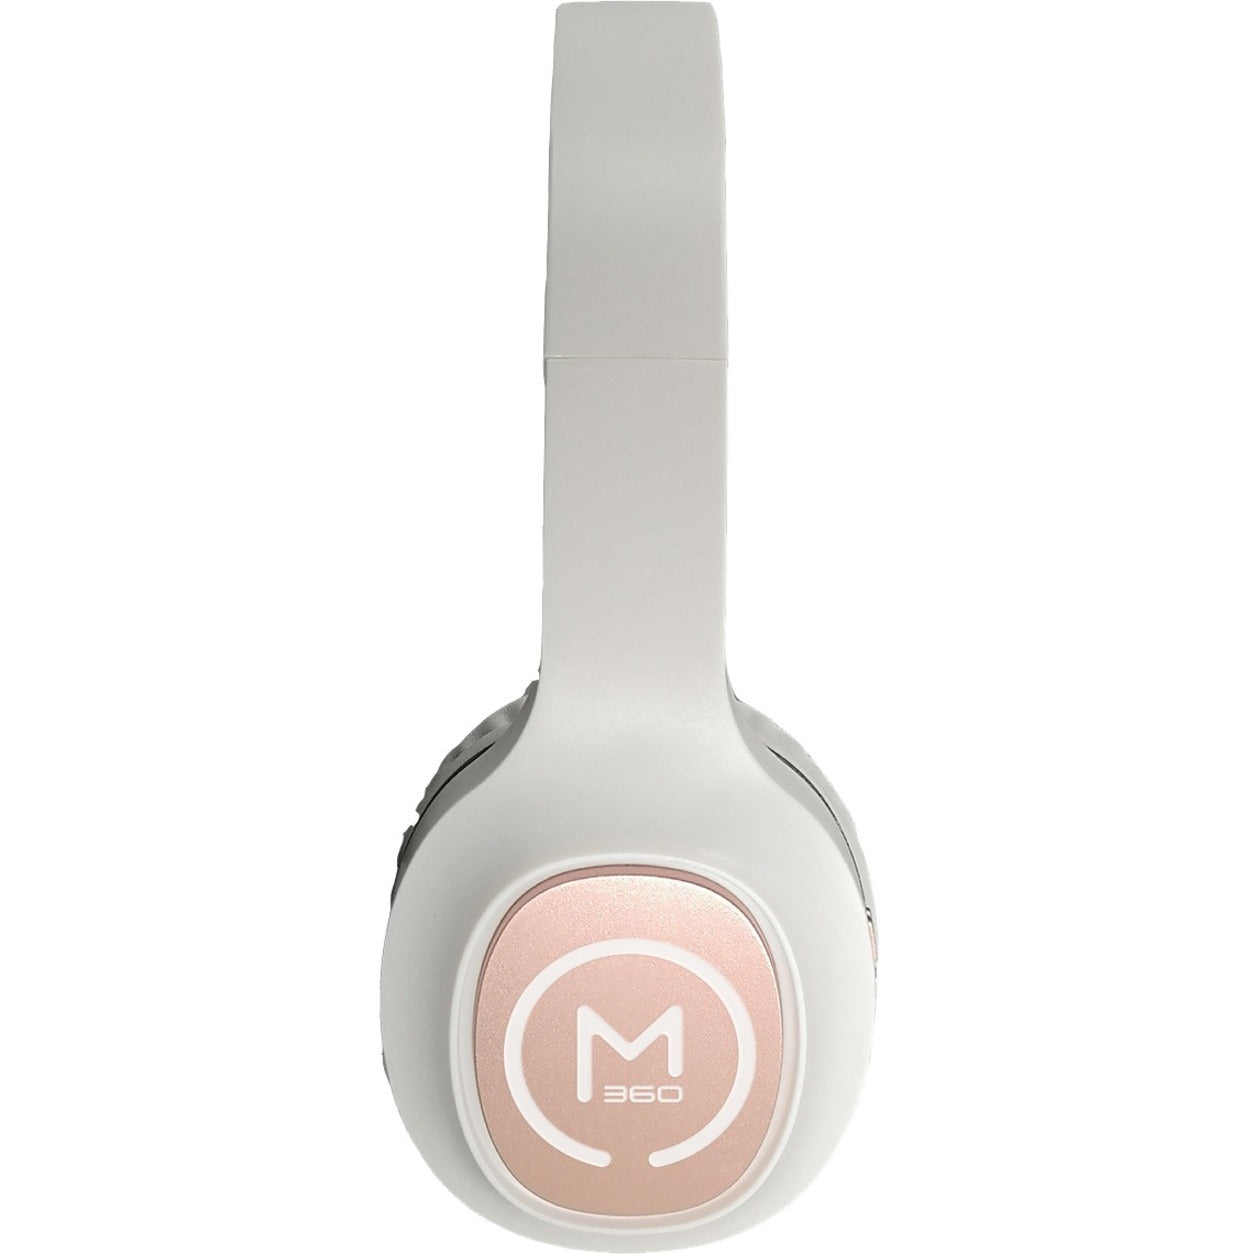 Morpheus 360 Tremors Wireless On-Ear Headphones - Bluetooth 5.0 Headset with Microphone - HP4500R